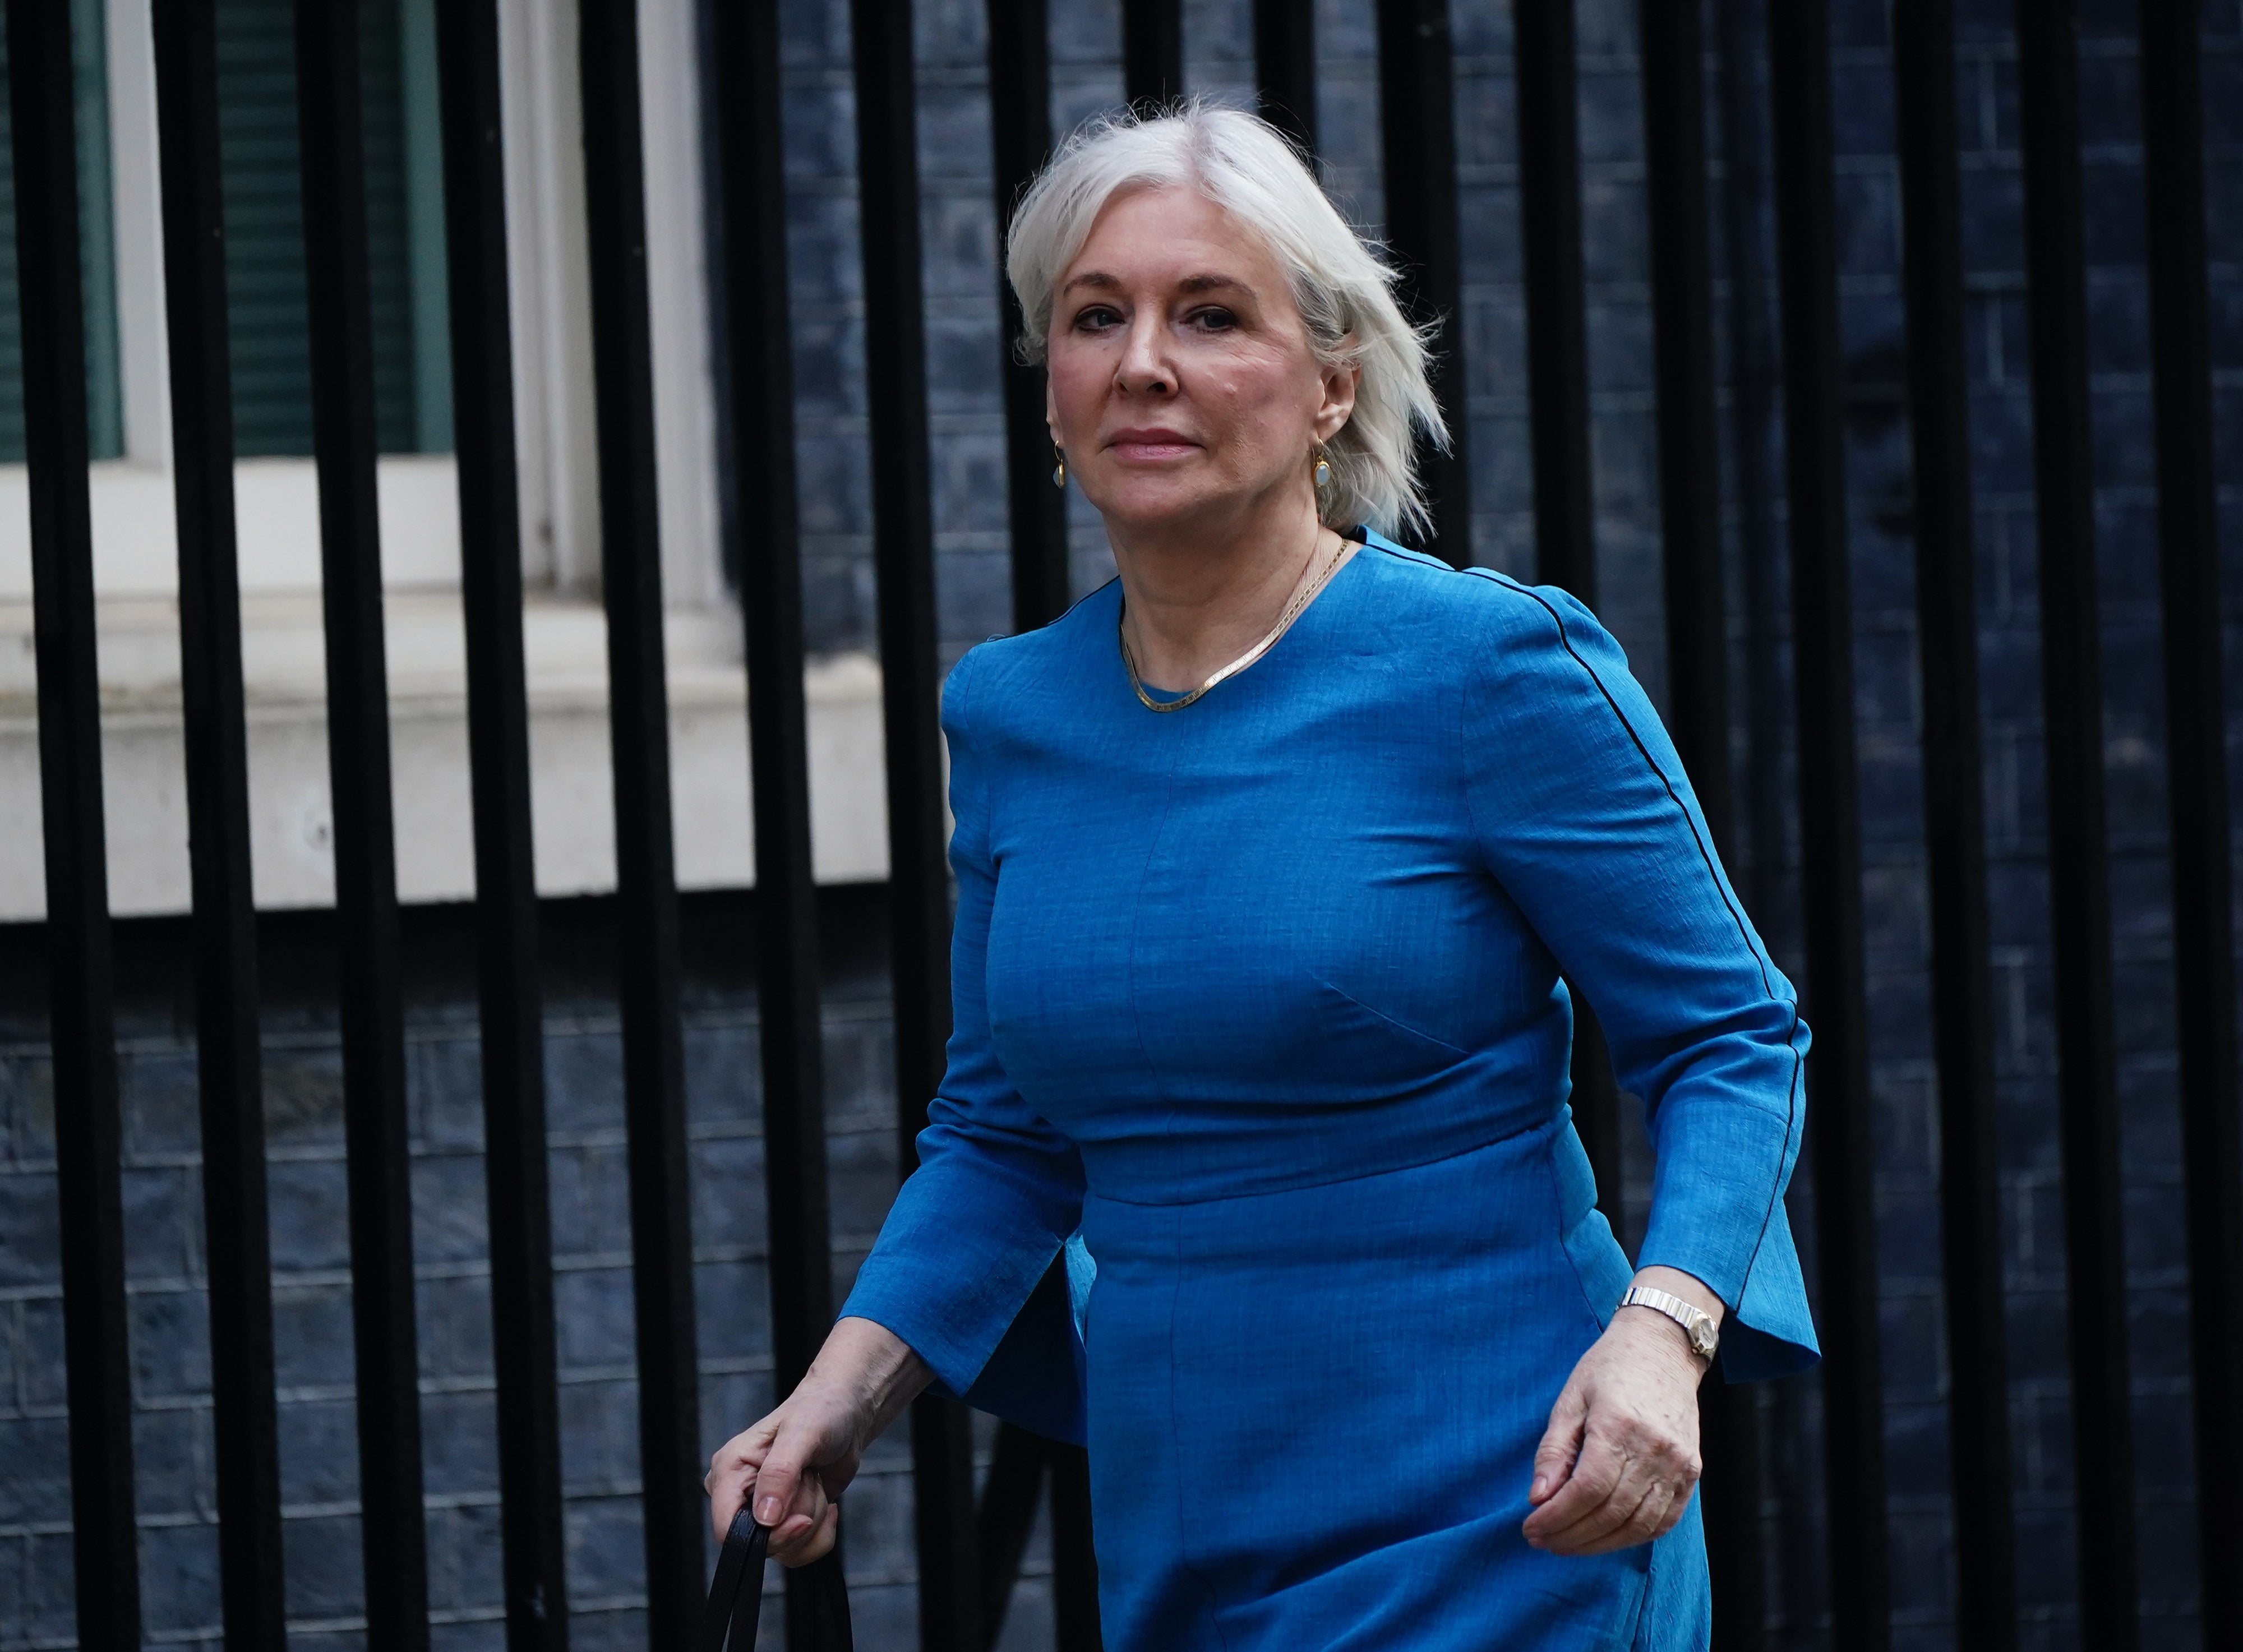 I reminded Dorries of her reality TV past last week when I found myself in front of her before the Digital, Culture, Media and Sport Select Committee